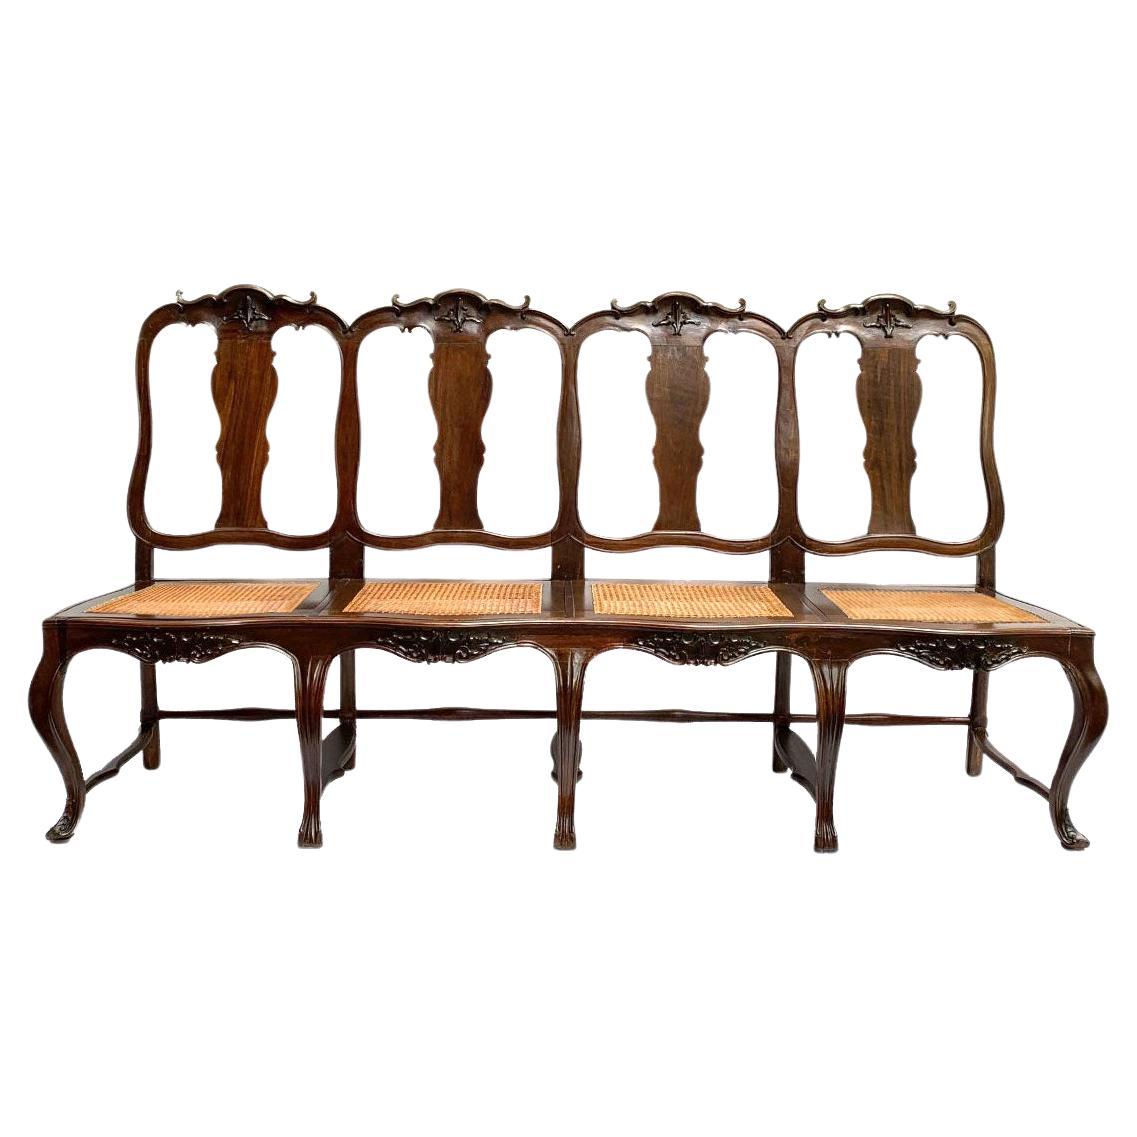 Magnificent 18th Century South American Colonial Escaño Settee 